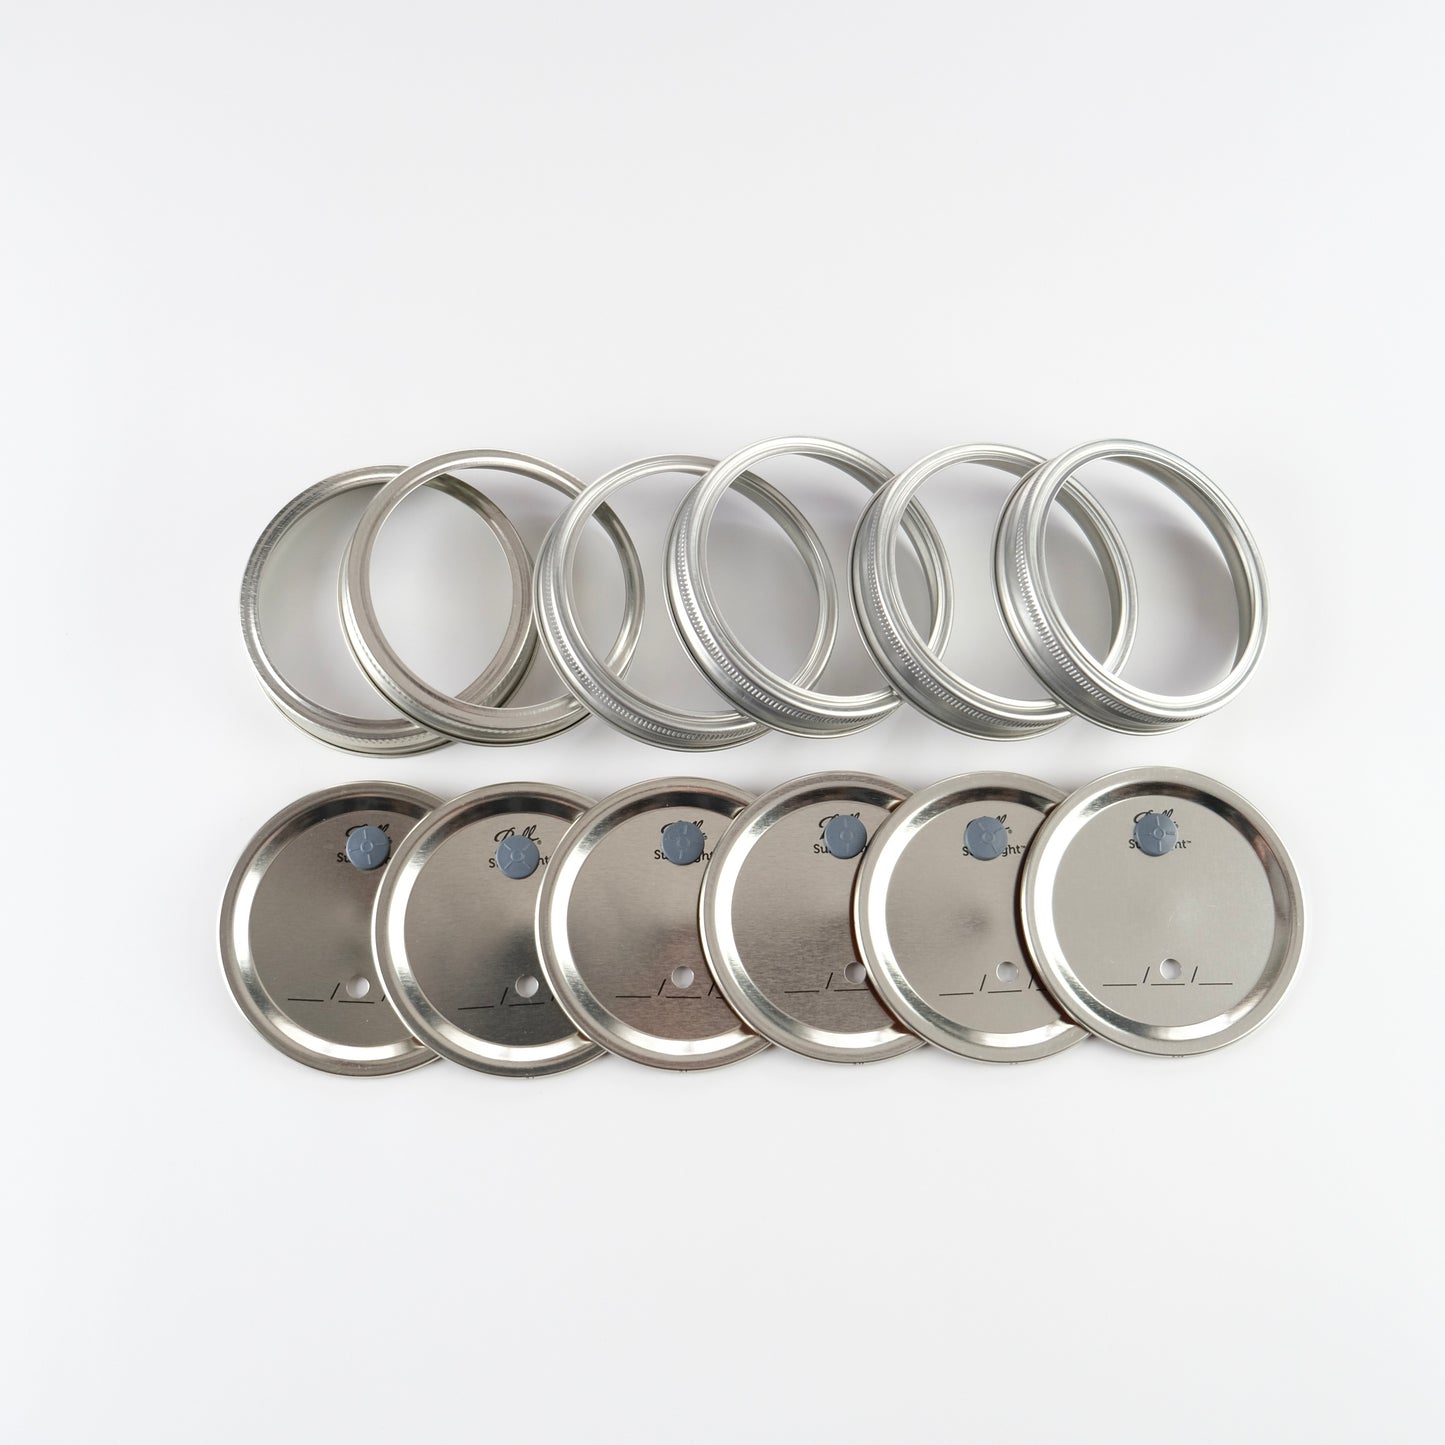 Wide-Mouth Vented & Plugged Jar Lids (Set of 6)